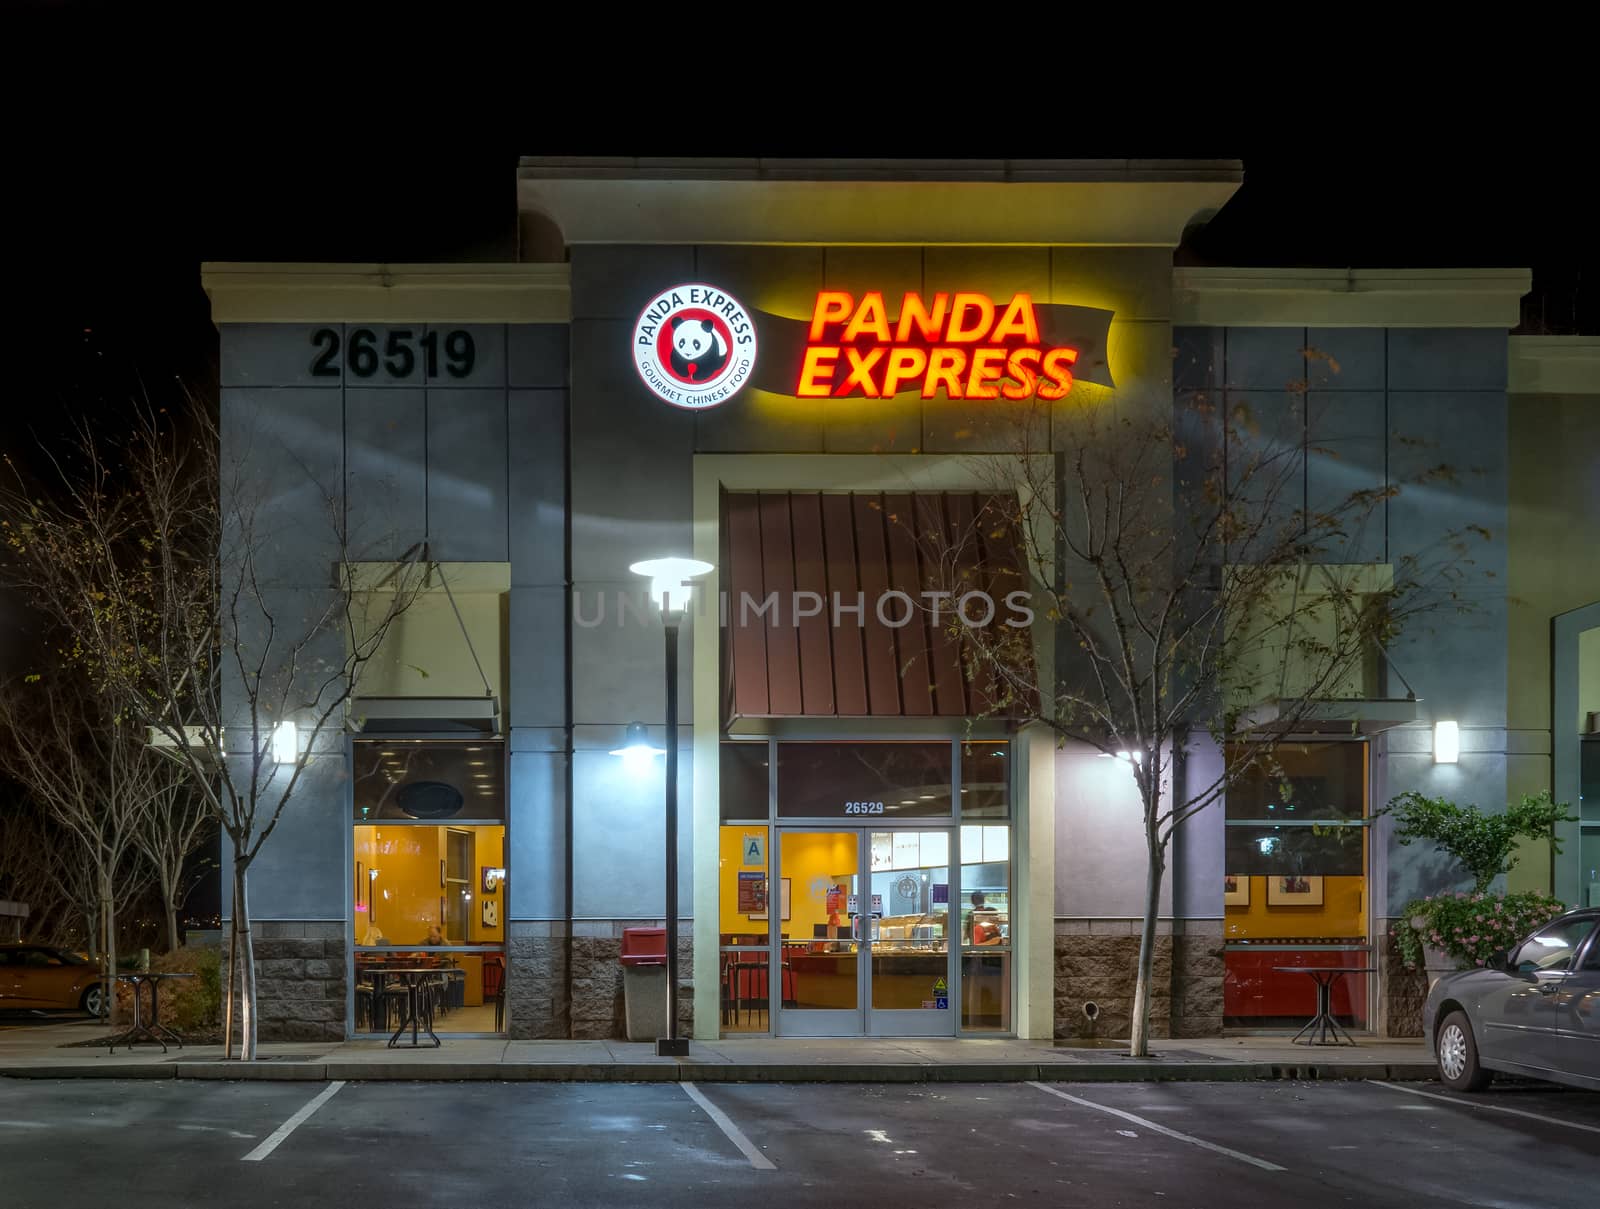 SANTA CLARITA, CA/USA - JANUARY, 5, 2016: Panda Express restaurant exterior and logo. Panda Express is a fast casual restaurant chain which serves American Chinese cuisine.